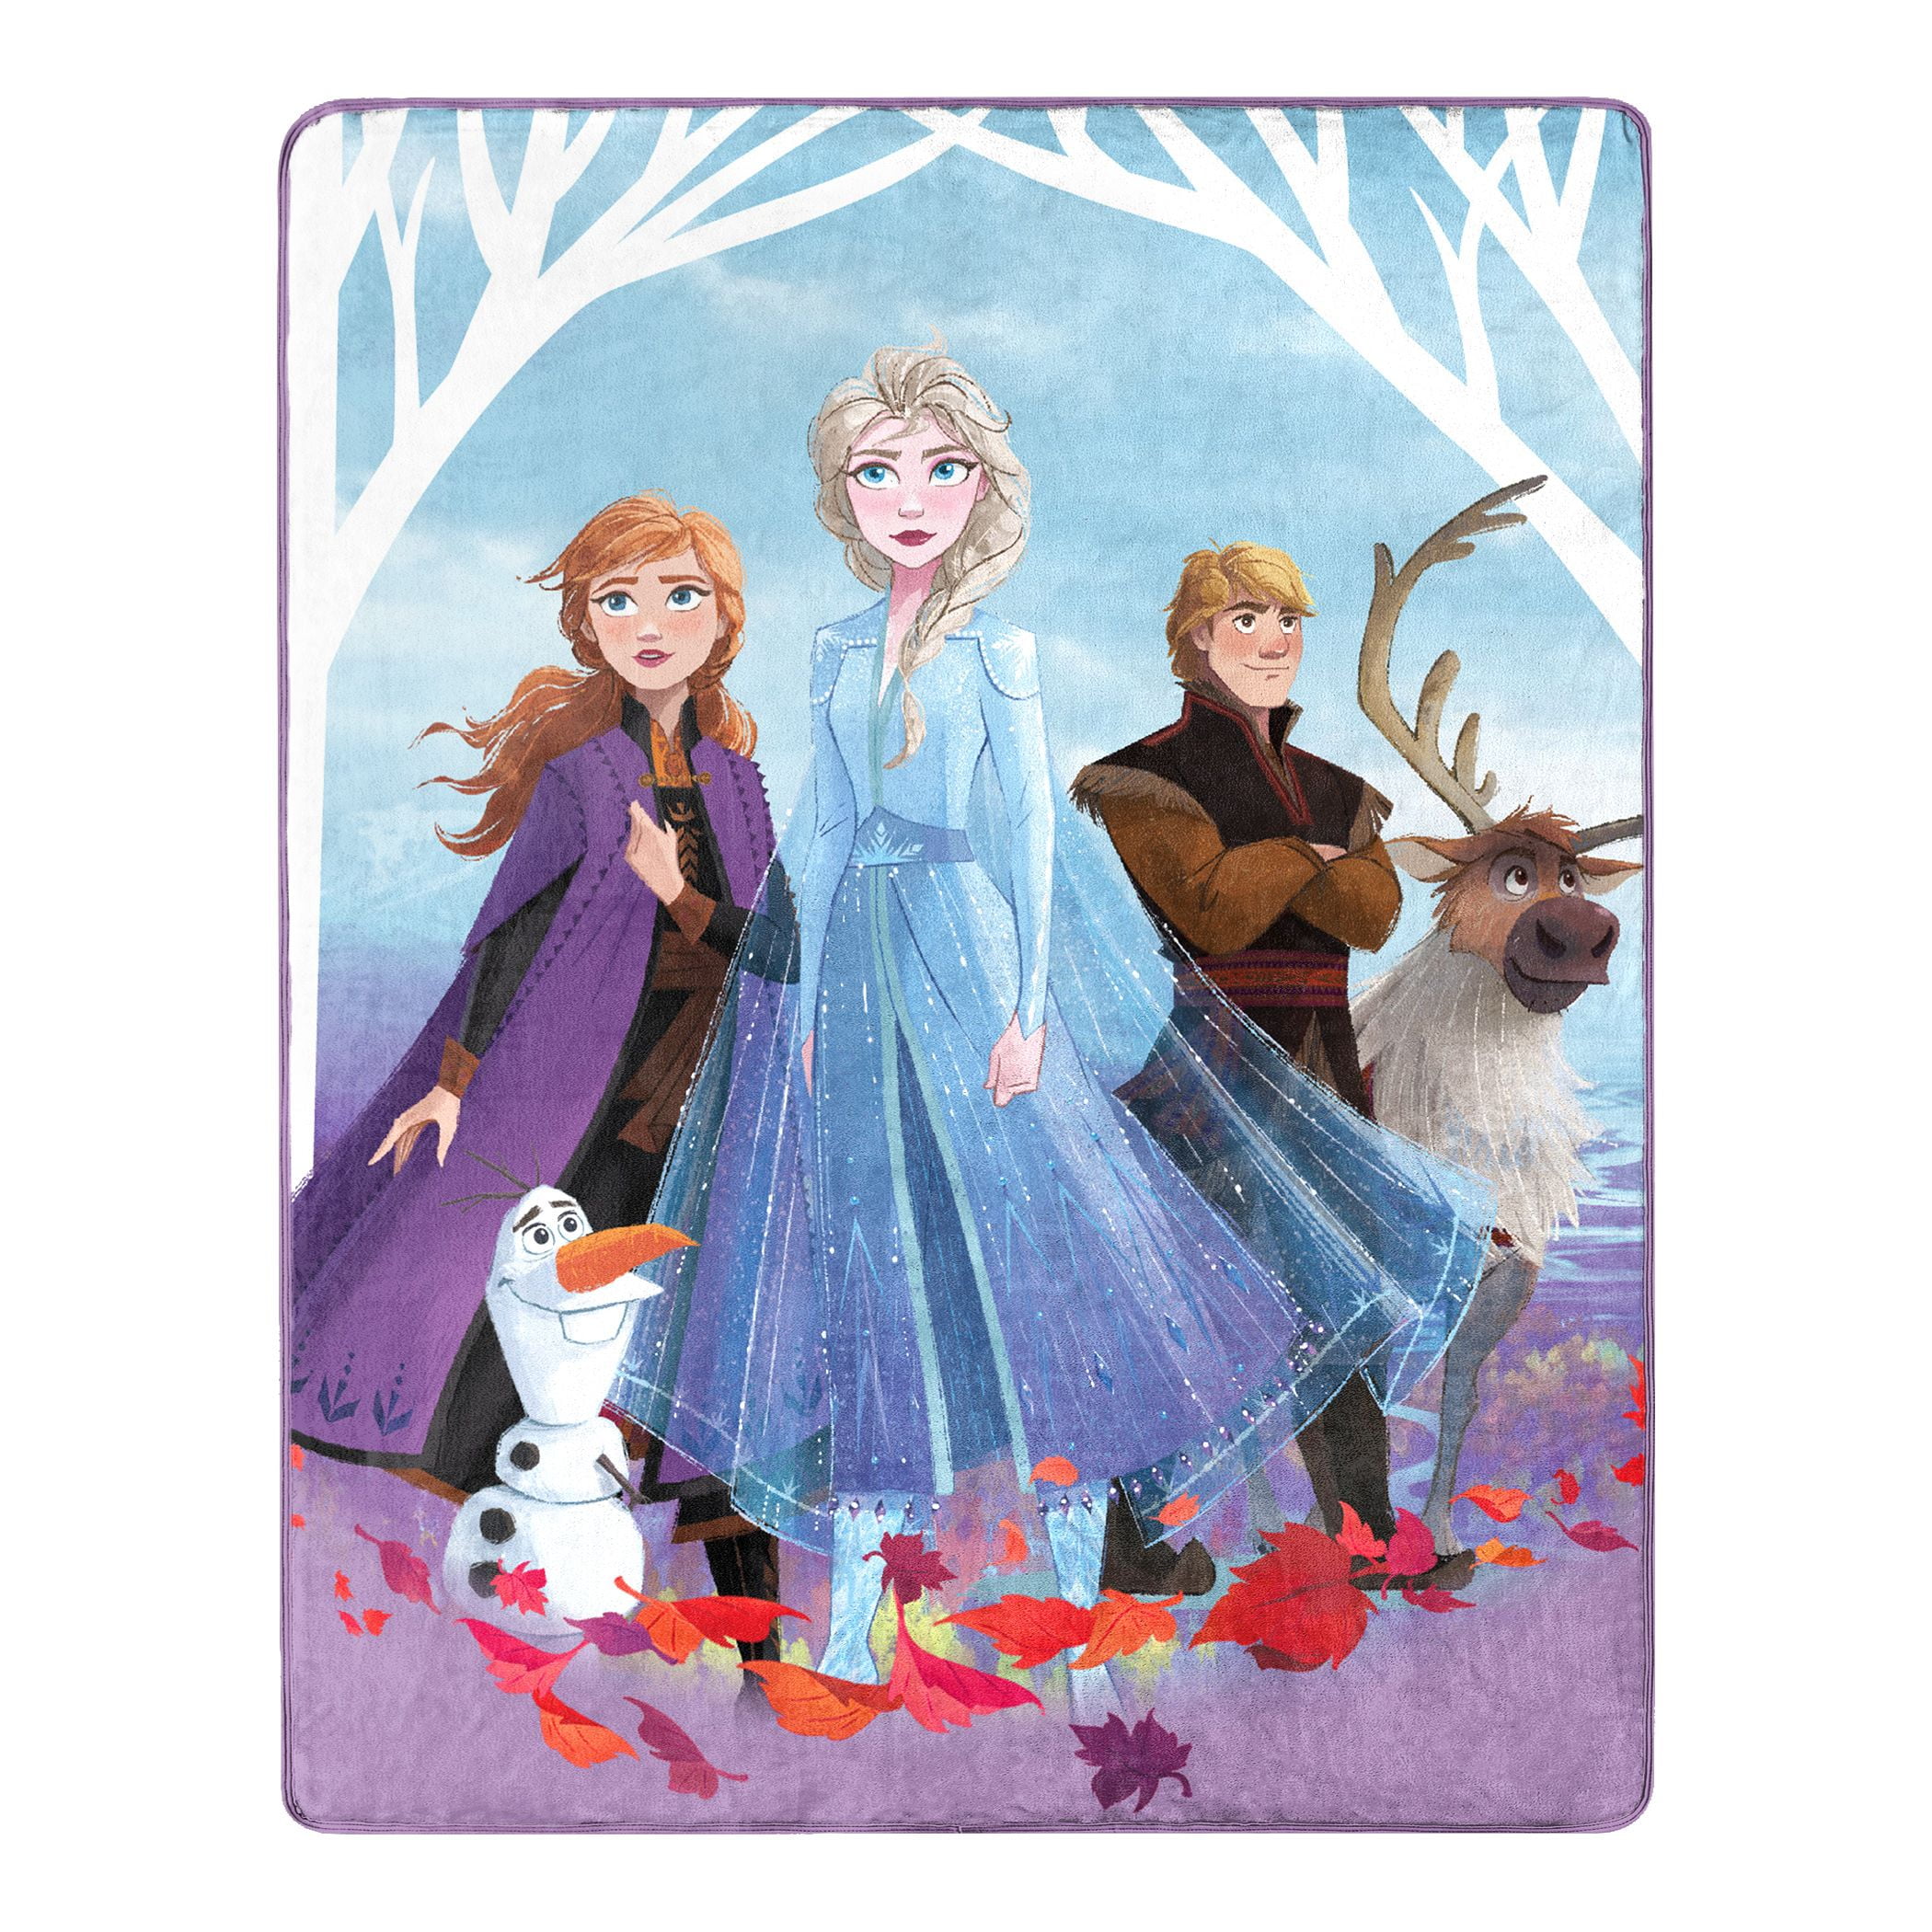 Purple Anna Elsa Kristoff and Sven Design with Matching Pillowcase Frozen 2 Disney Single Polycotton Duvet Cover Officially Licensed Reversible Two Sided Bedding Olaf